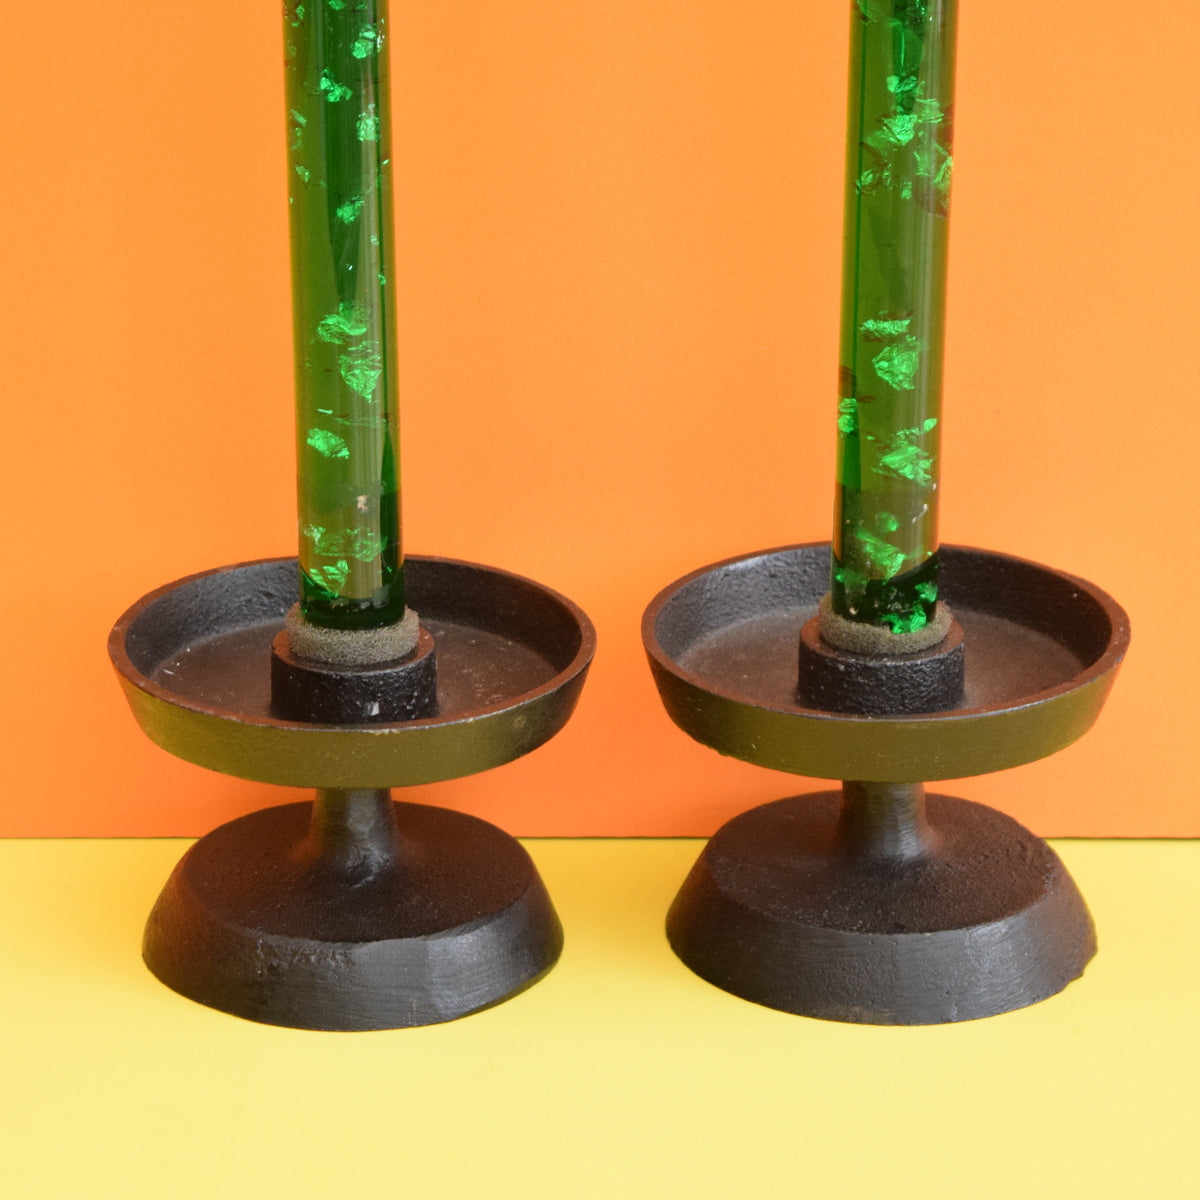 Vintage 1960s Cast Metal Candle Holder Pair - Green Plastic Flake Candles